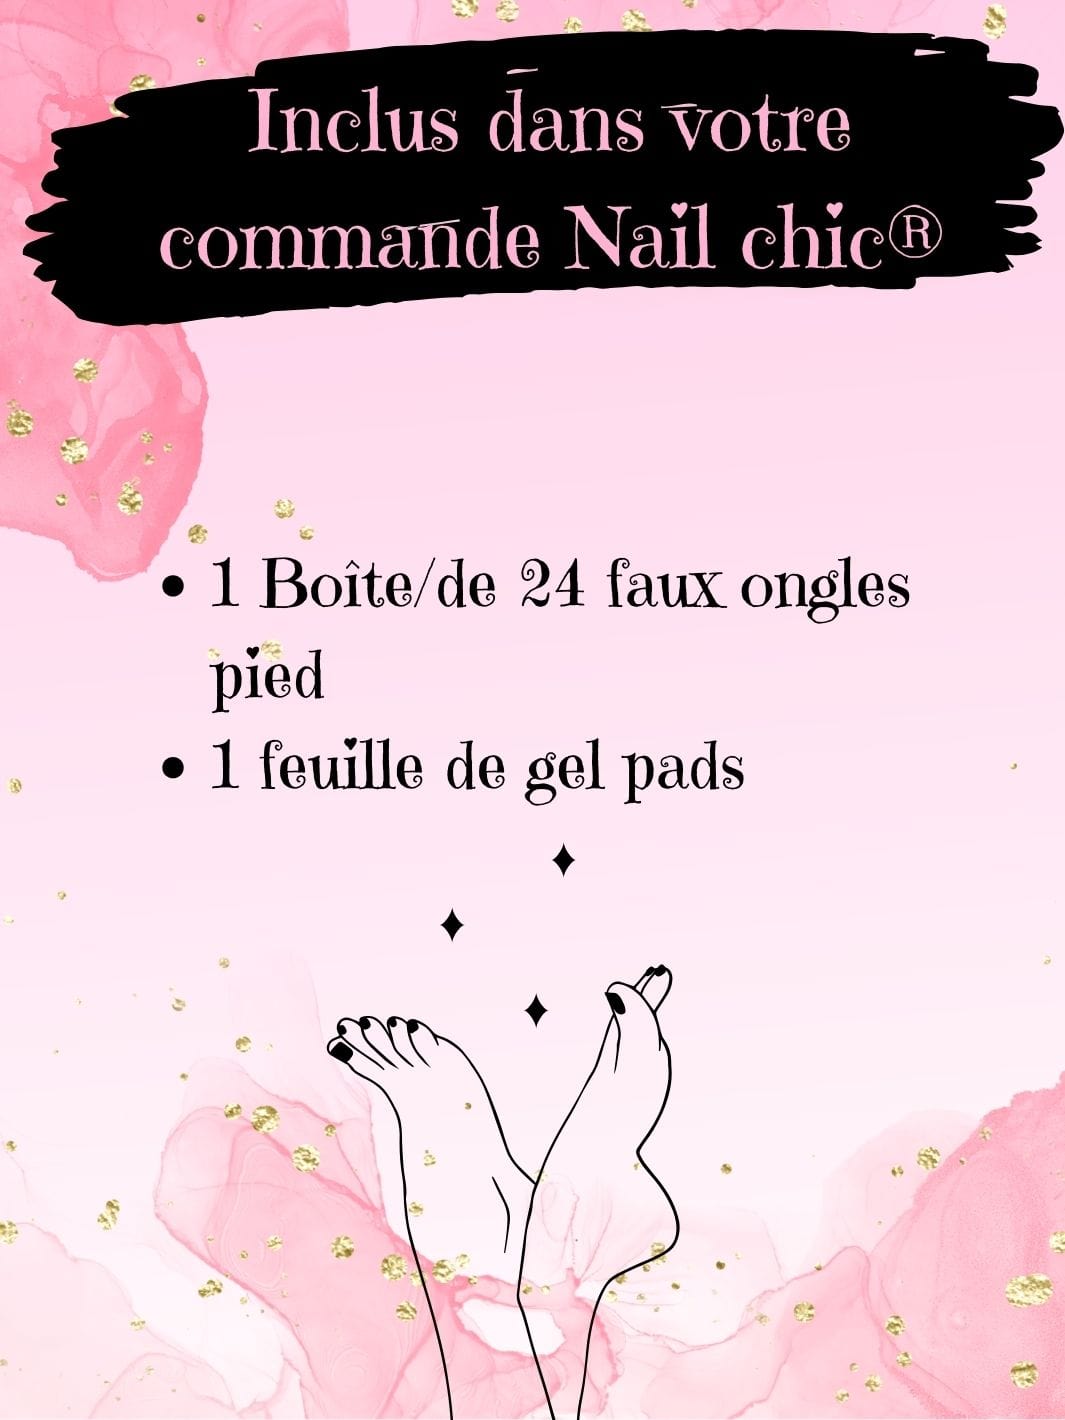 Faux ongle pieds Nail Chic